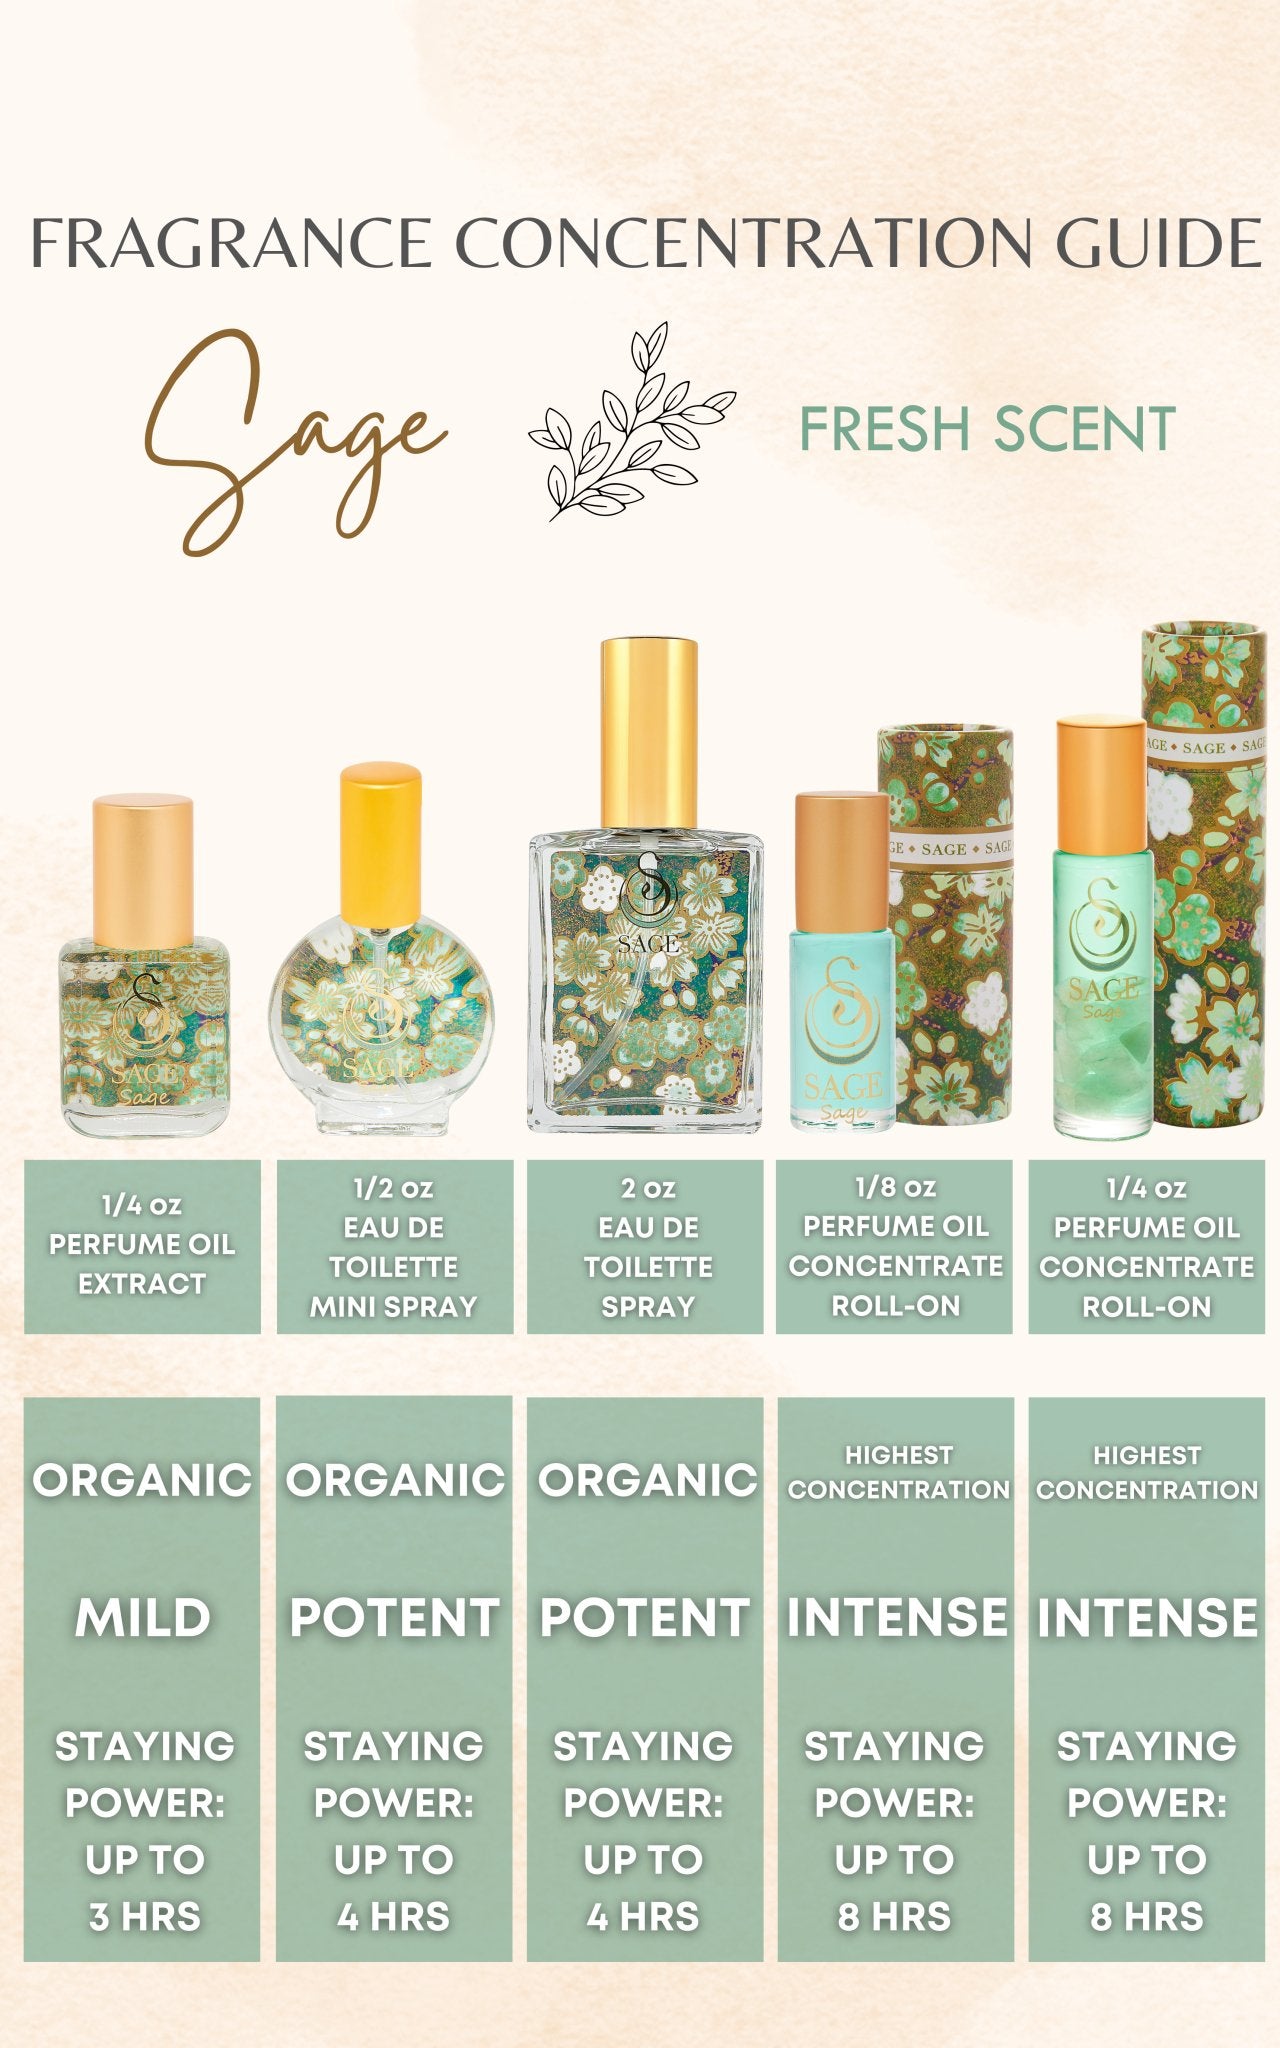 Sage 1/8 oz Perfume Oil Concentrate Roll-On by Sage - The Sage Lifestyle